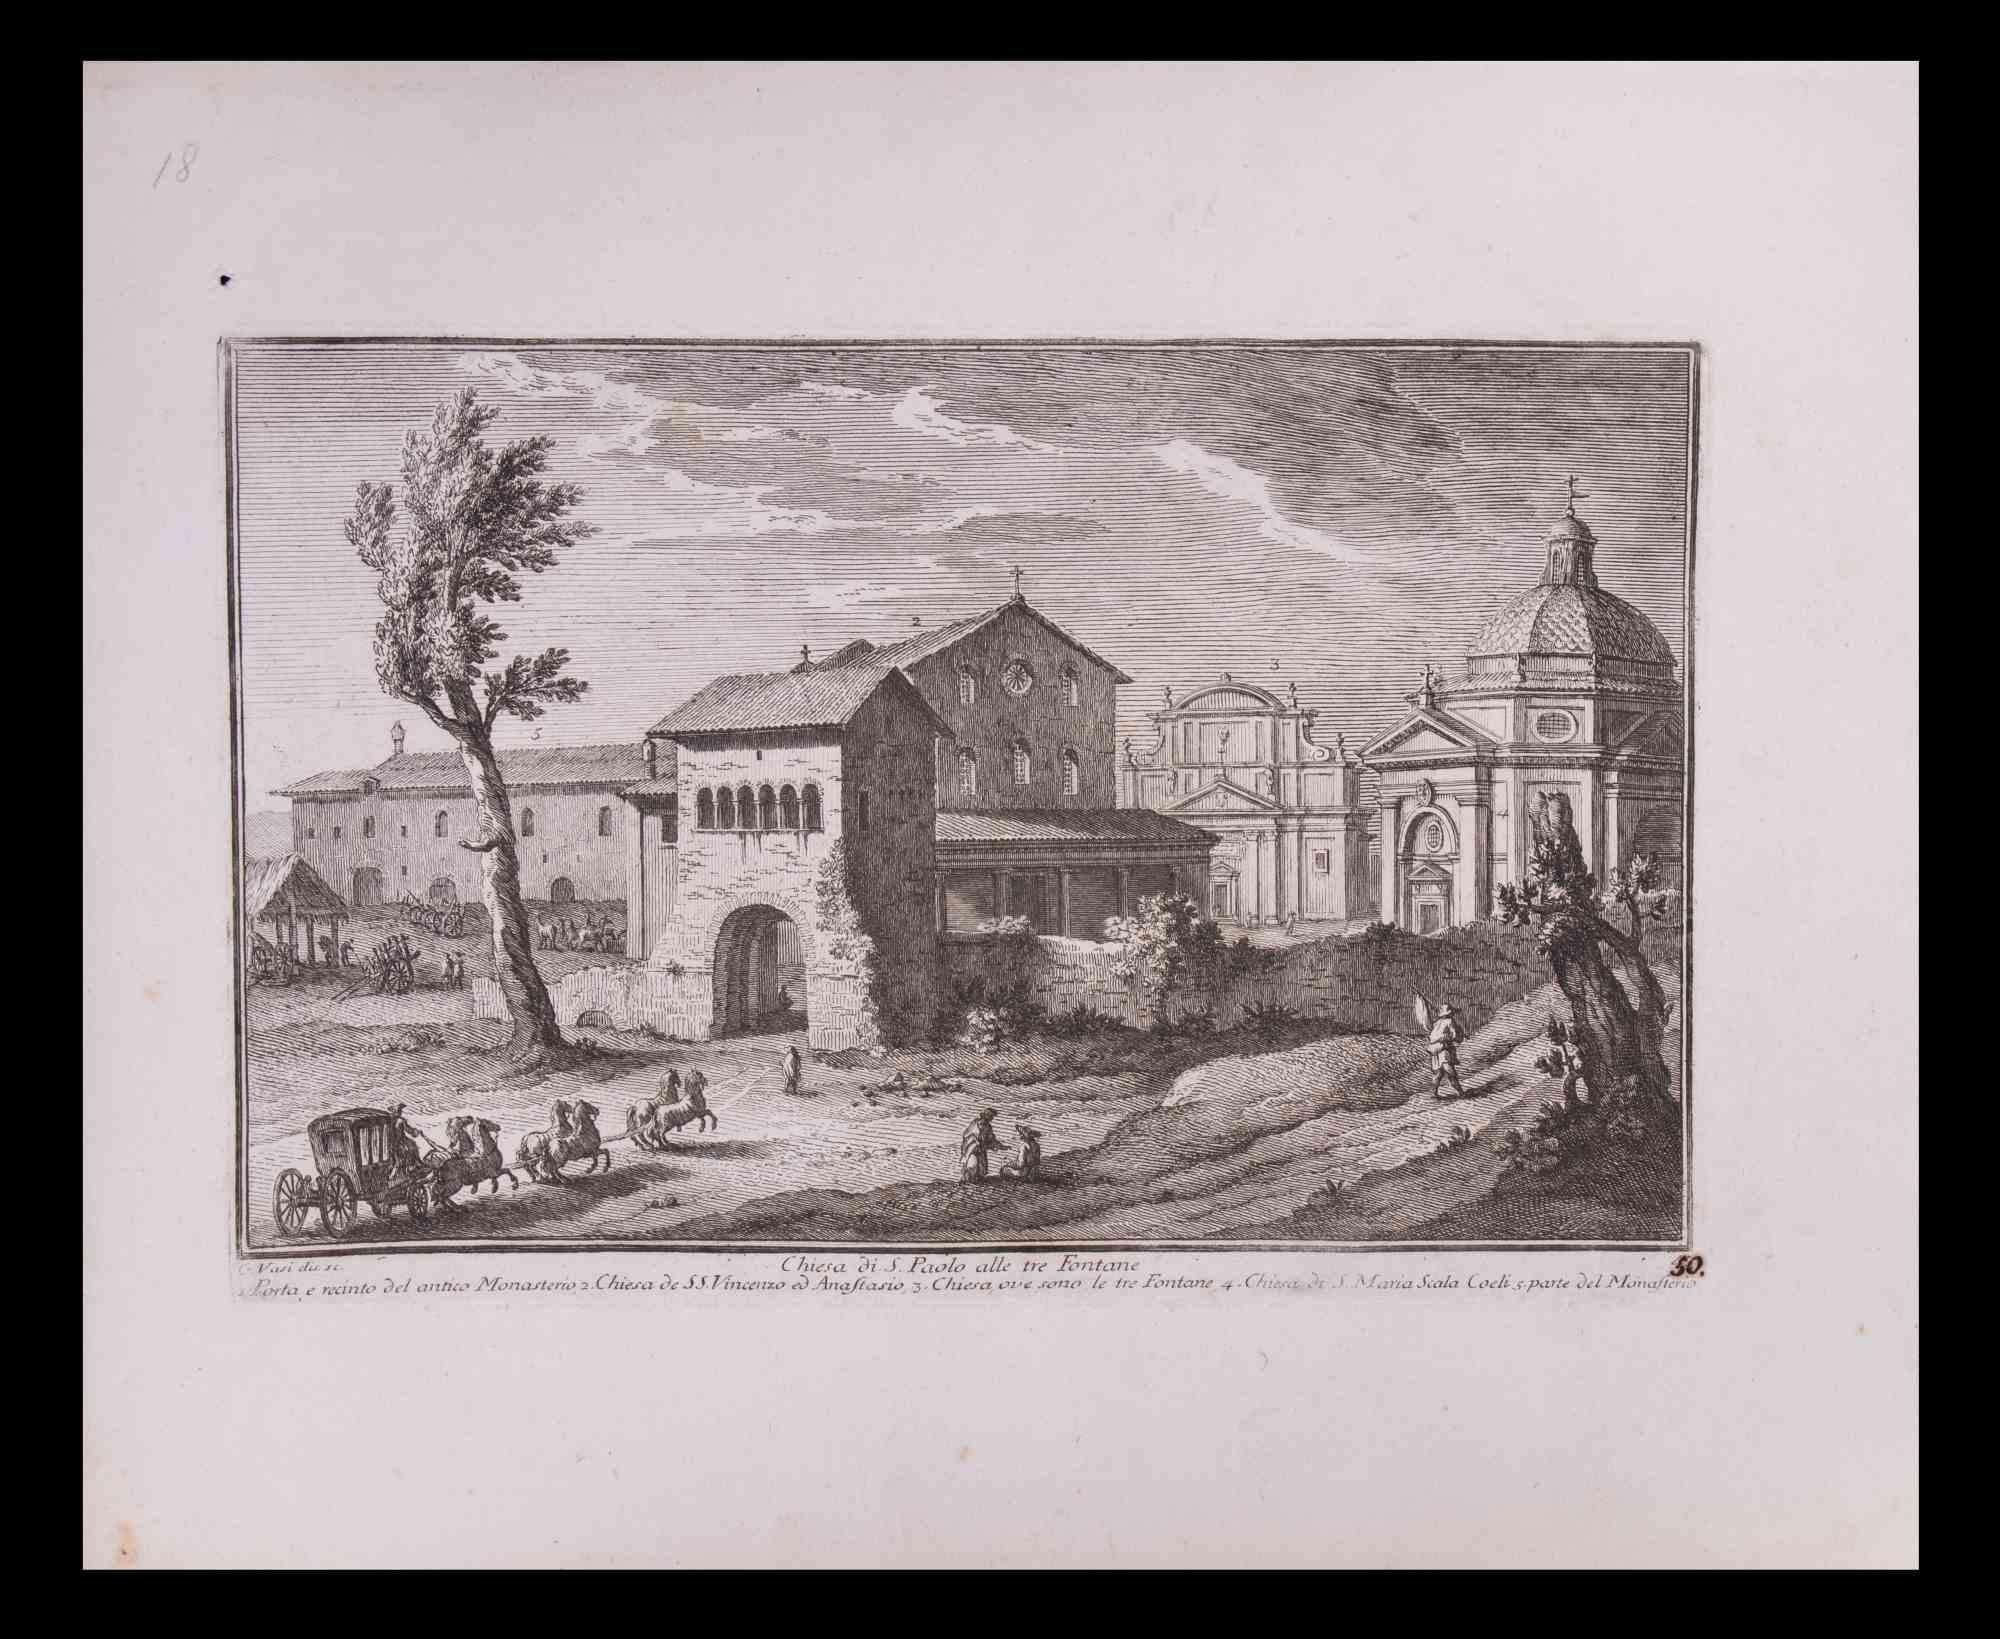 Giuseppe Vasi Figurative Print - Chiesa di S. Paolo alle Tre Fontane  - Etching by G. Vasi - Late 18th Century